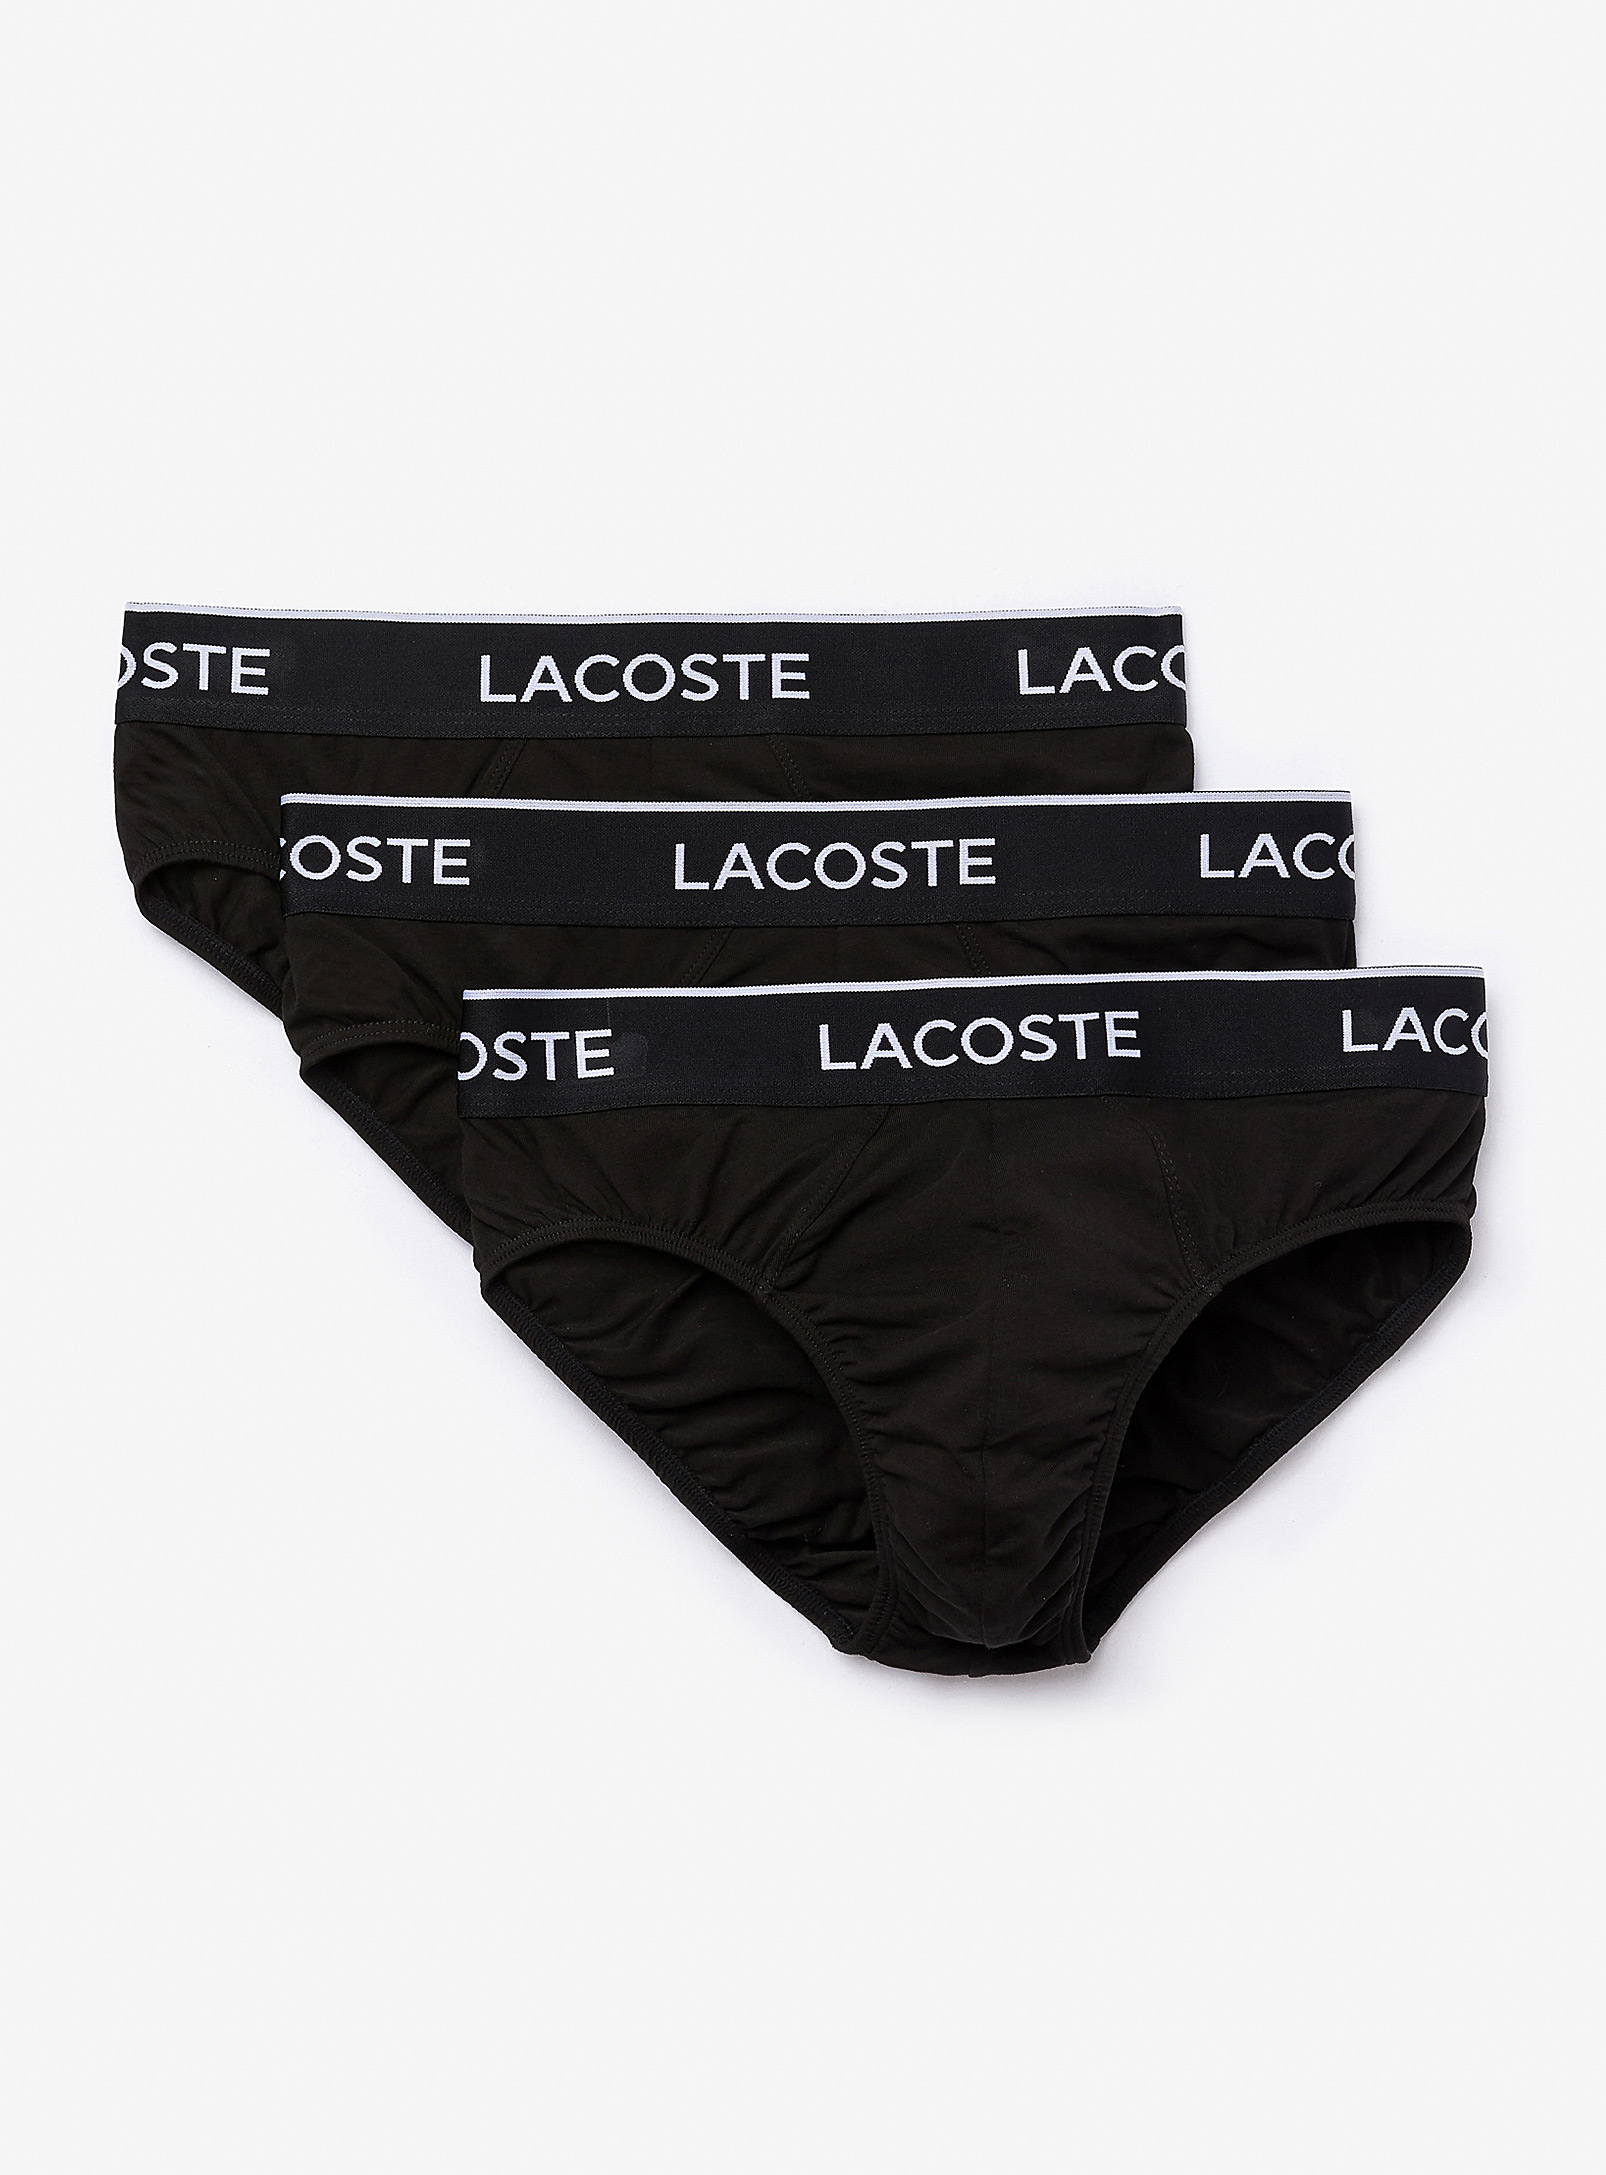 Lacoste - Men's Repeated logo briefs 3-pack